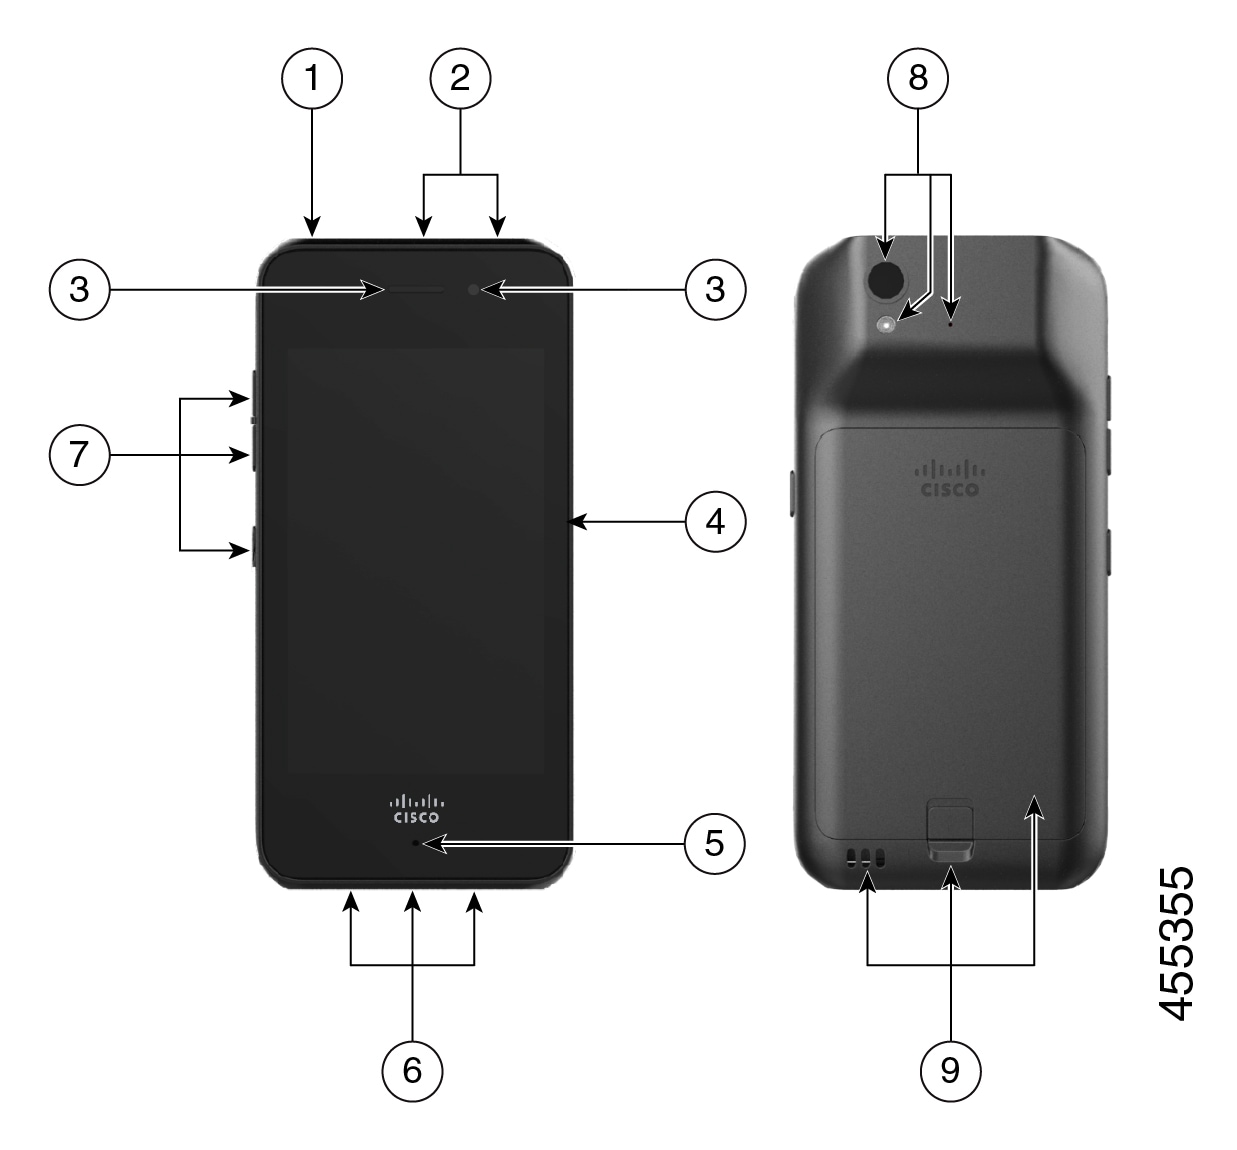 The front and back view of the 840S with numbered callouts. On the front view, callouts 1 and 2 are at the top of the phone. Callout 3 is on the top-left front and top-right front of the phone. Callout 4 is on the right side of the phone. Callout 5 is on the bottom front of the phone. Callout 6 is on the bottom of the phone. Callout 7 is on the left side of the phone. On the back view of the phone, callout 8 is at the top of the phone and callout 9 is at the bottom.